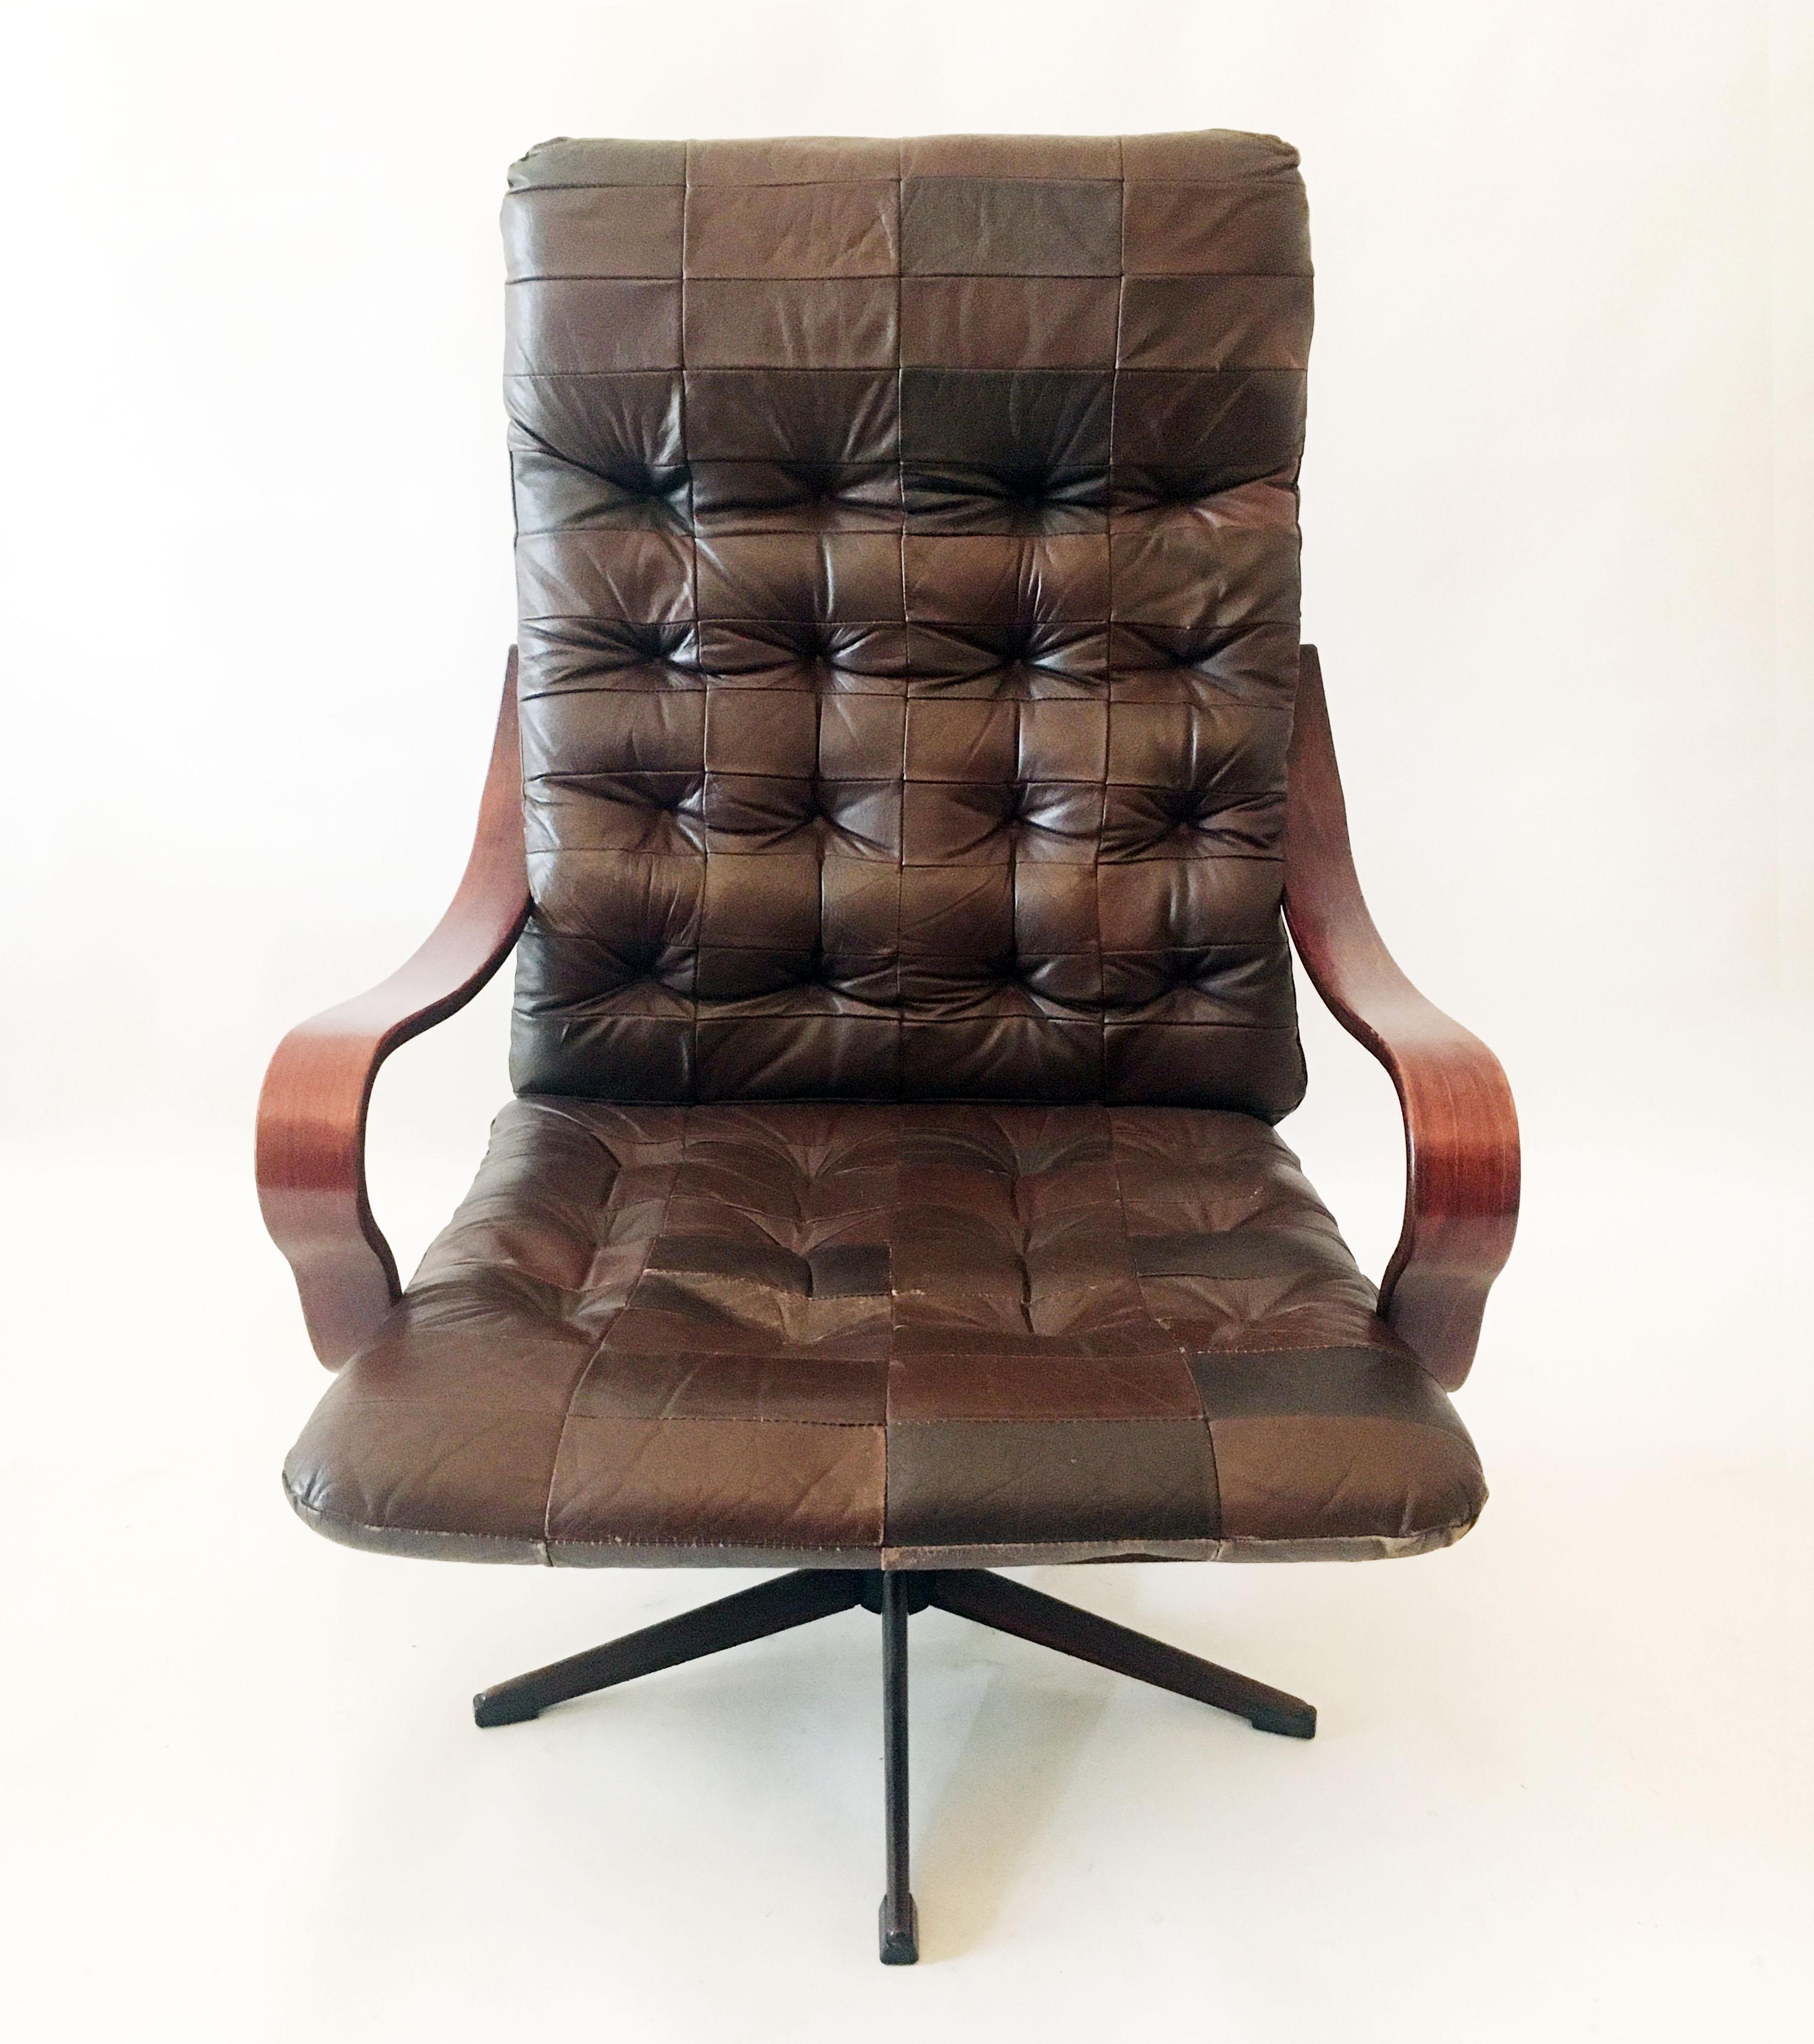 Westnova high back swivel lounge chairs patchwork leather, a pair, Norway, 1970. Beautiful patchwork and tufted leather swivel chairs with bentwood arms by Westnova of Norway. The leather has aged beautifully for the past 40 plus years, comes with a